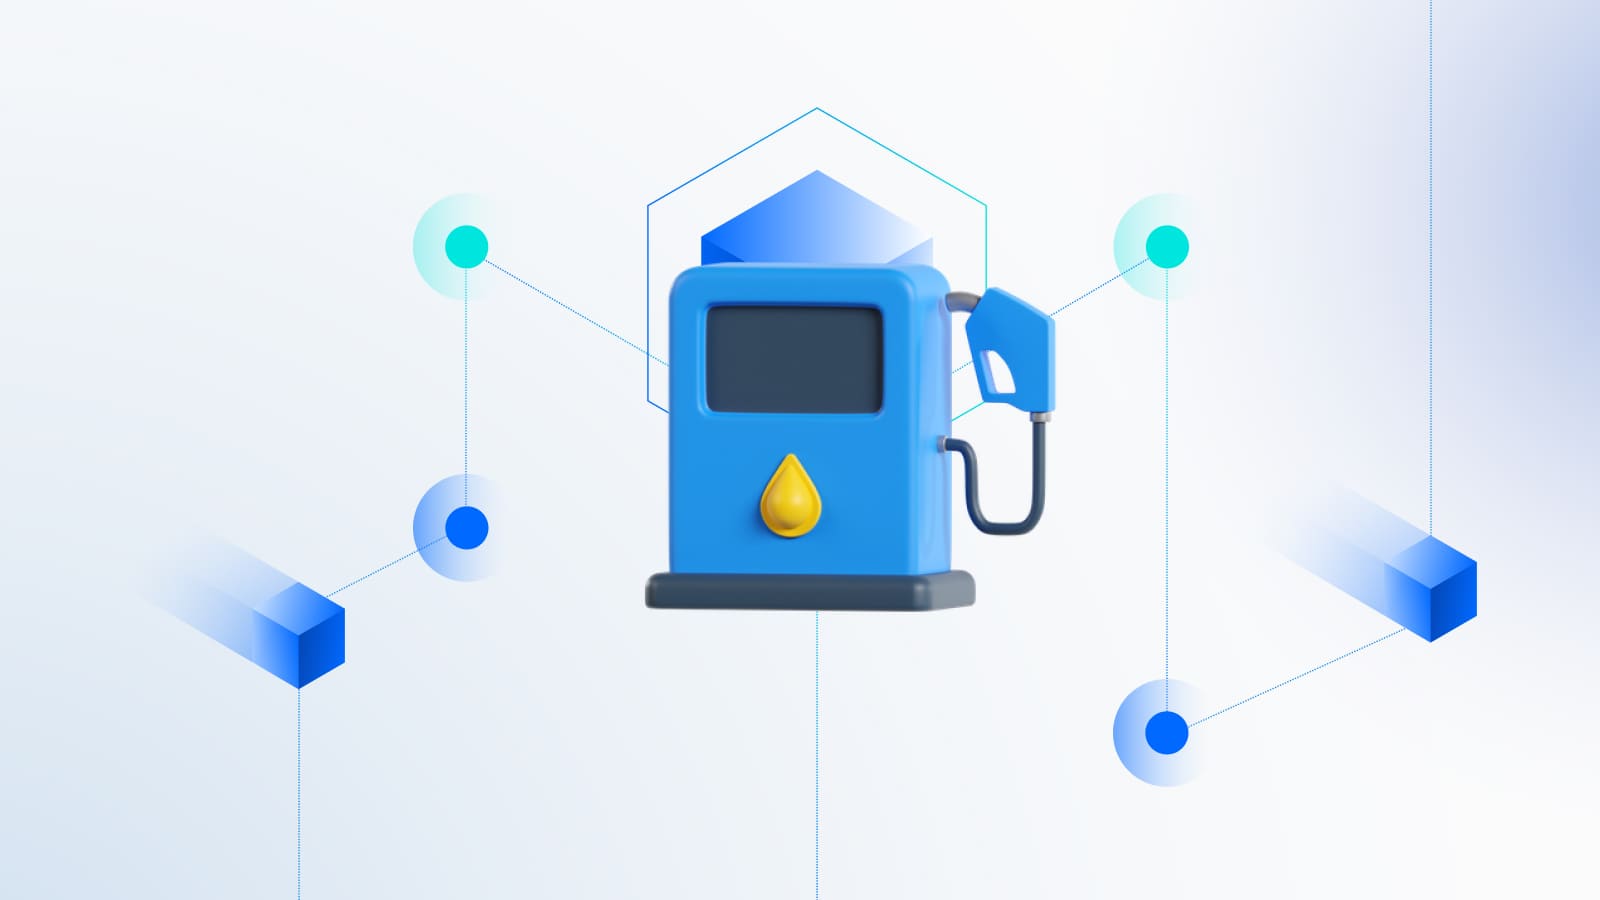 Gas is integrated into the Ethereum network and secures the transactions.